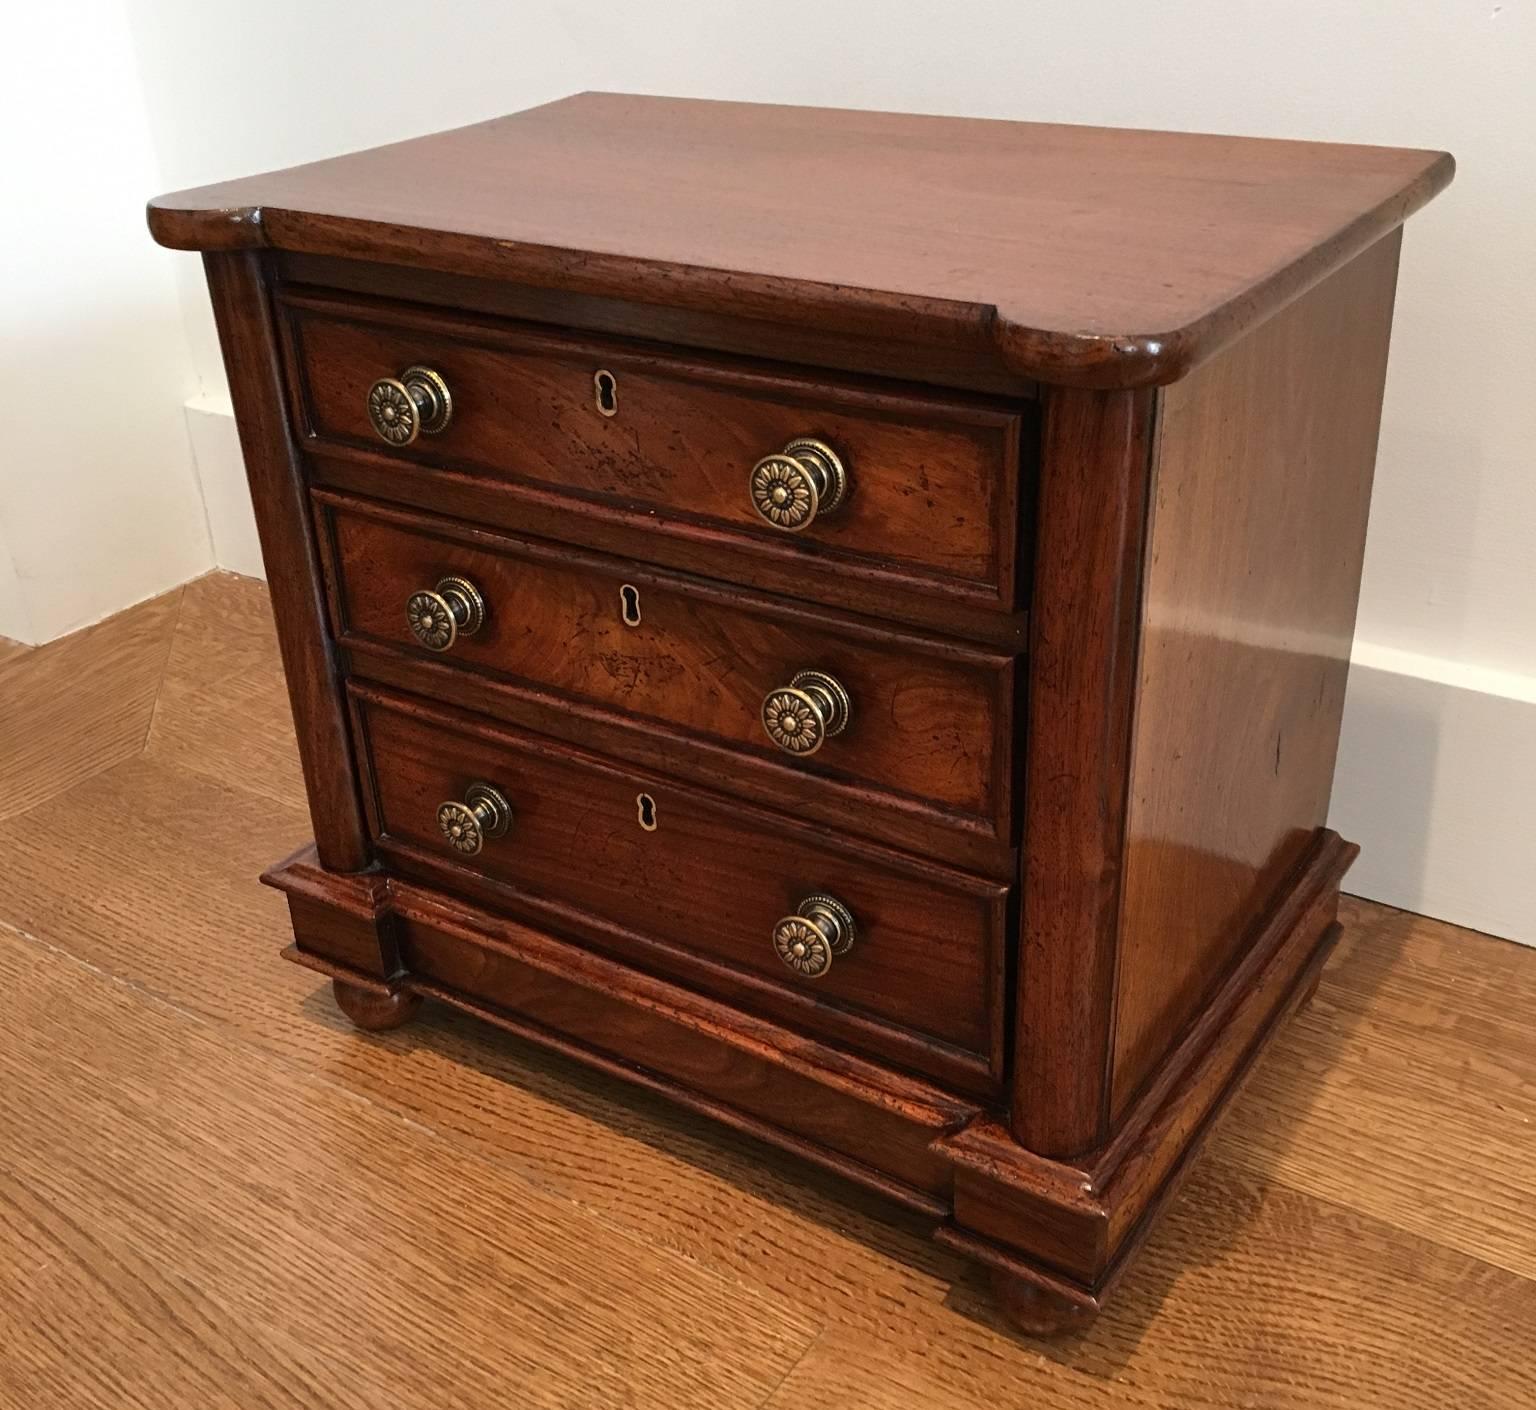 19th century English apprentice chest in ebonized wood with beautiful round knobs. 